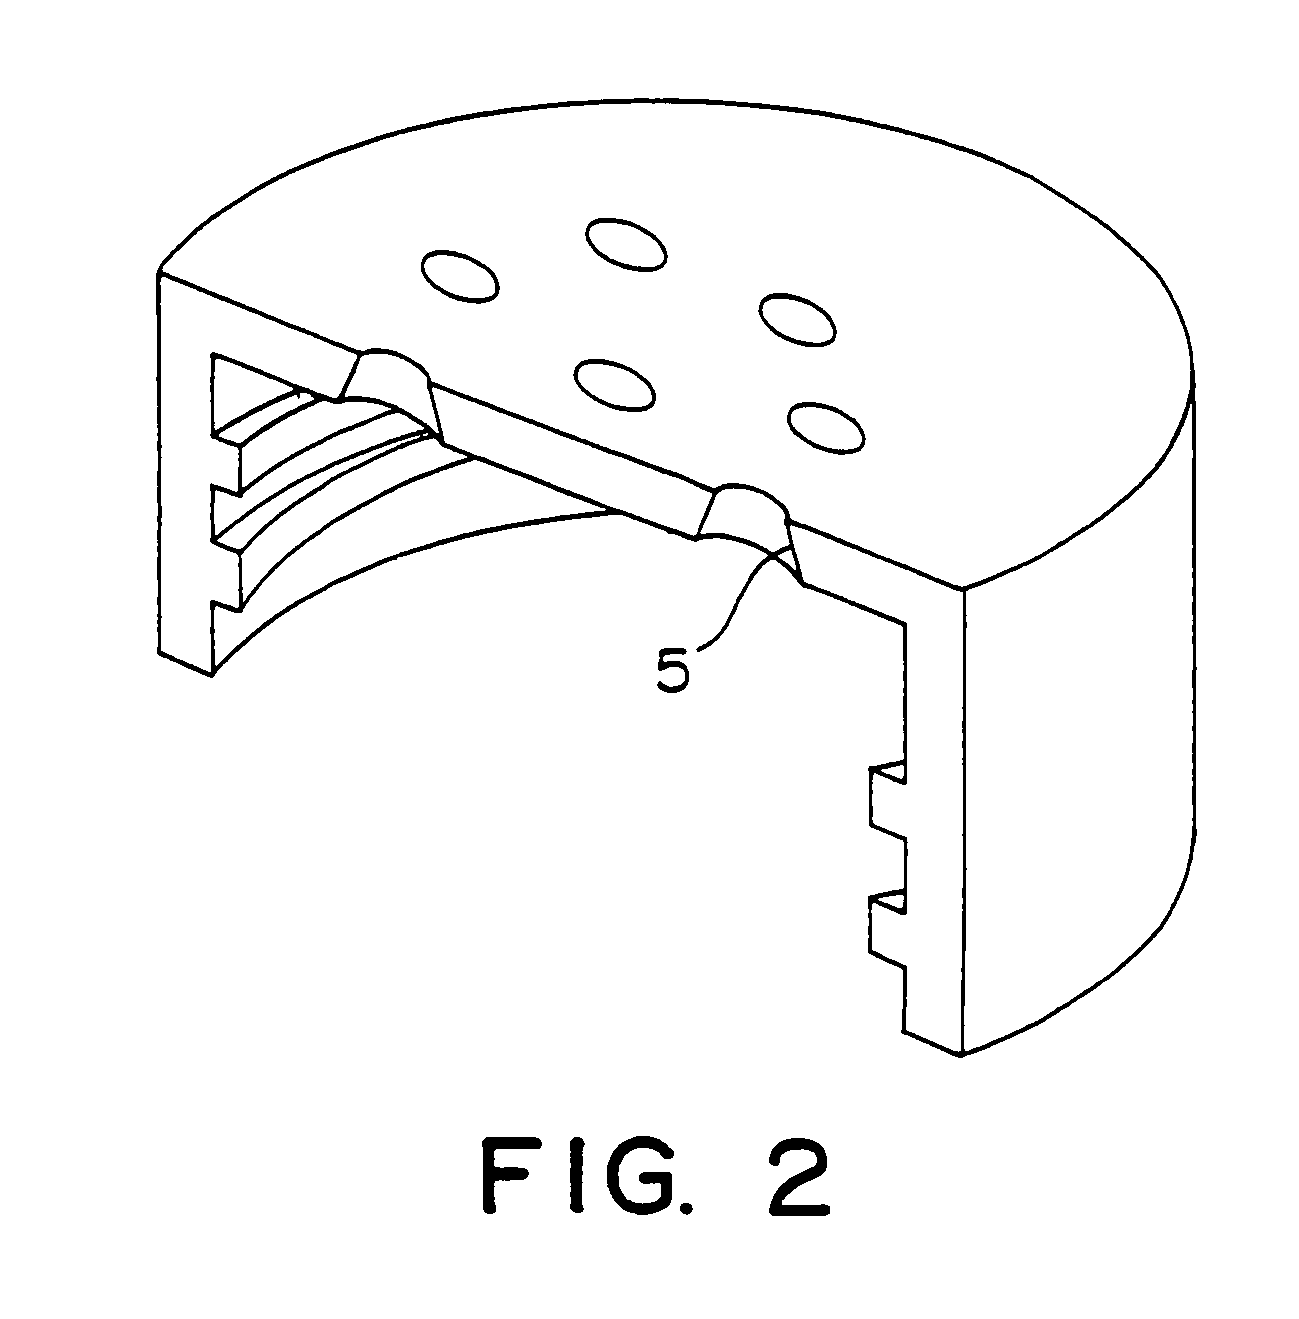 Wound irrigation device and method